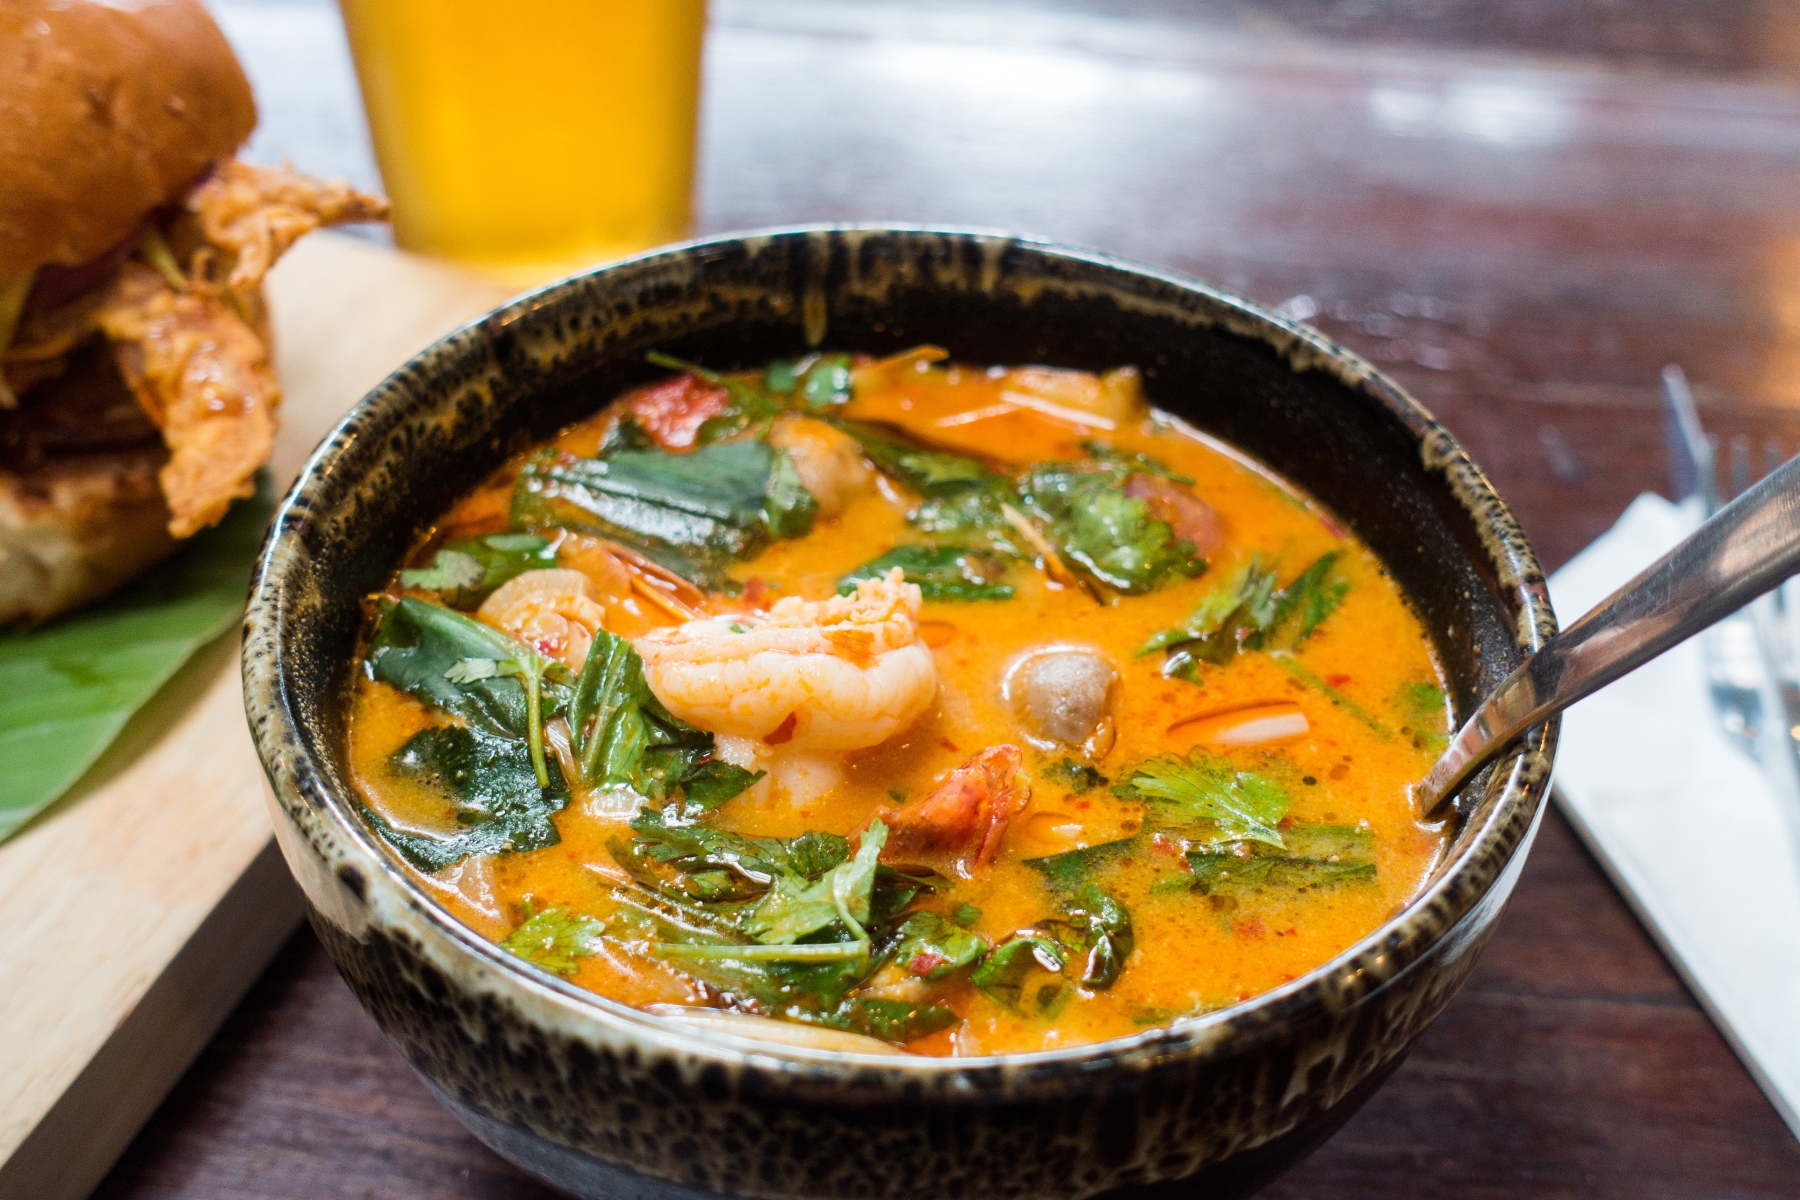 A bowl of tom yum goong with added crab, herbs, alongside a burger and a beer